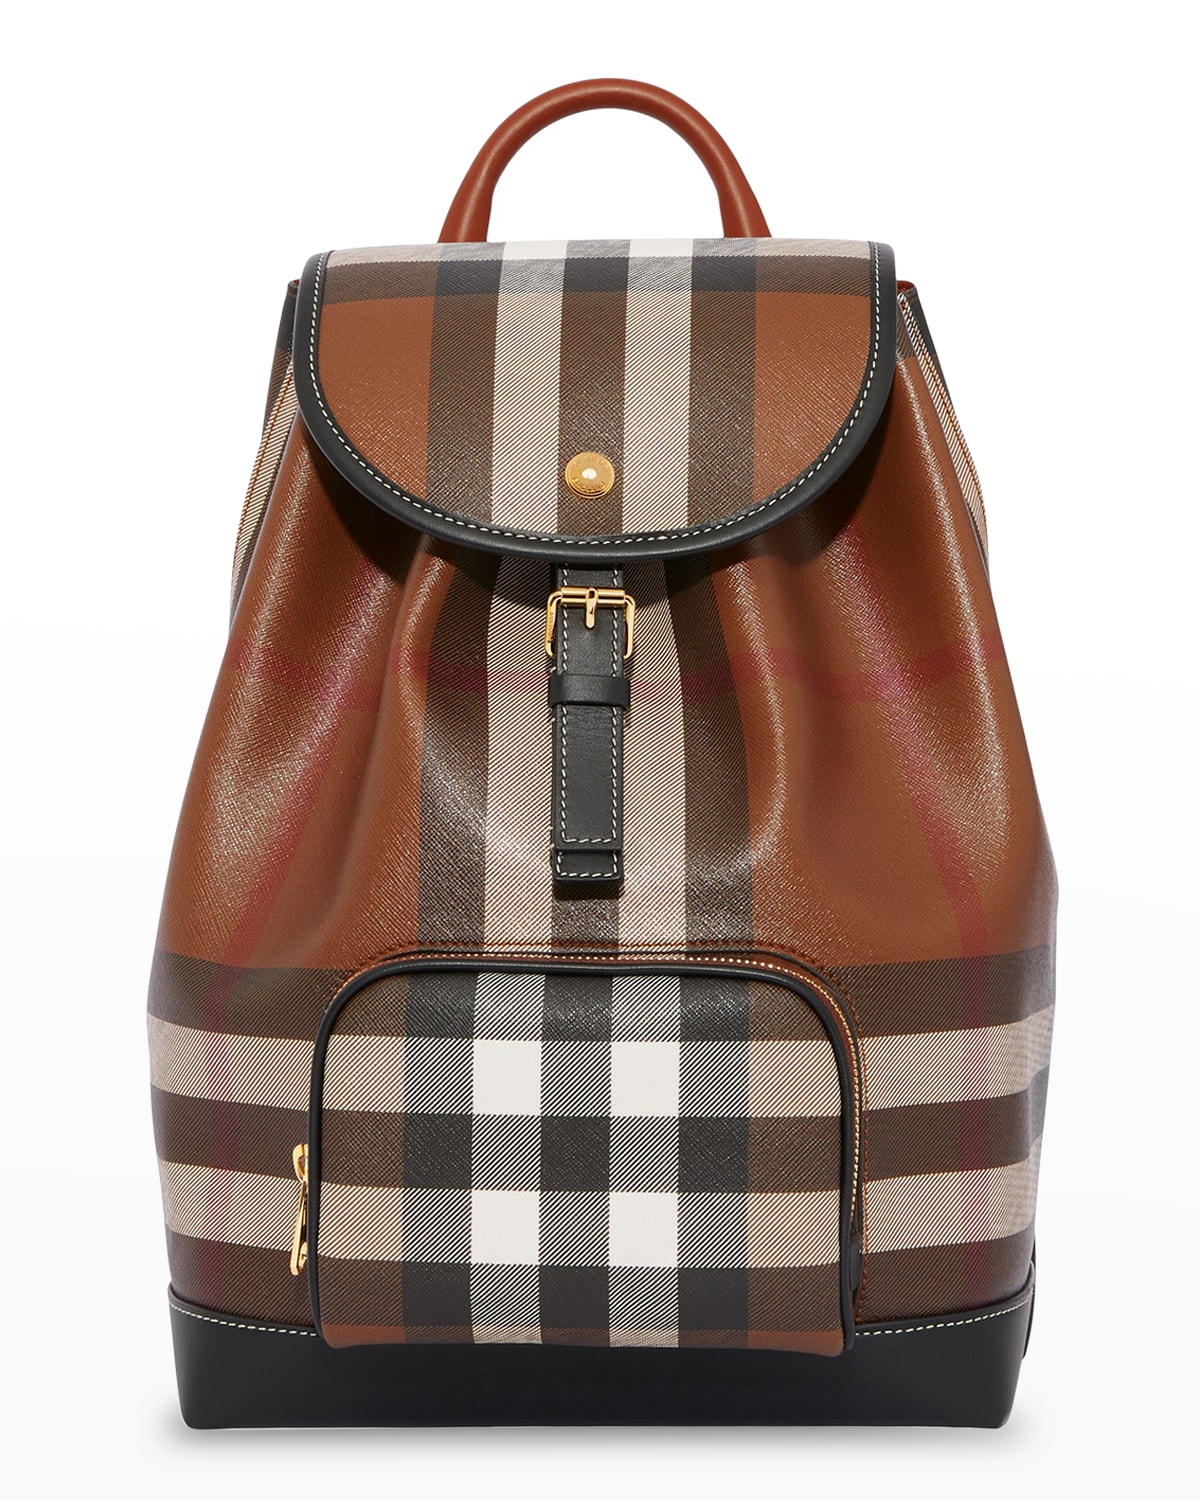 Burberry Check Flap Drawstring Leather Backpack